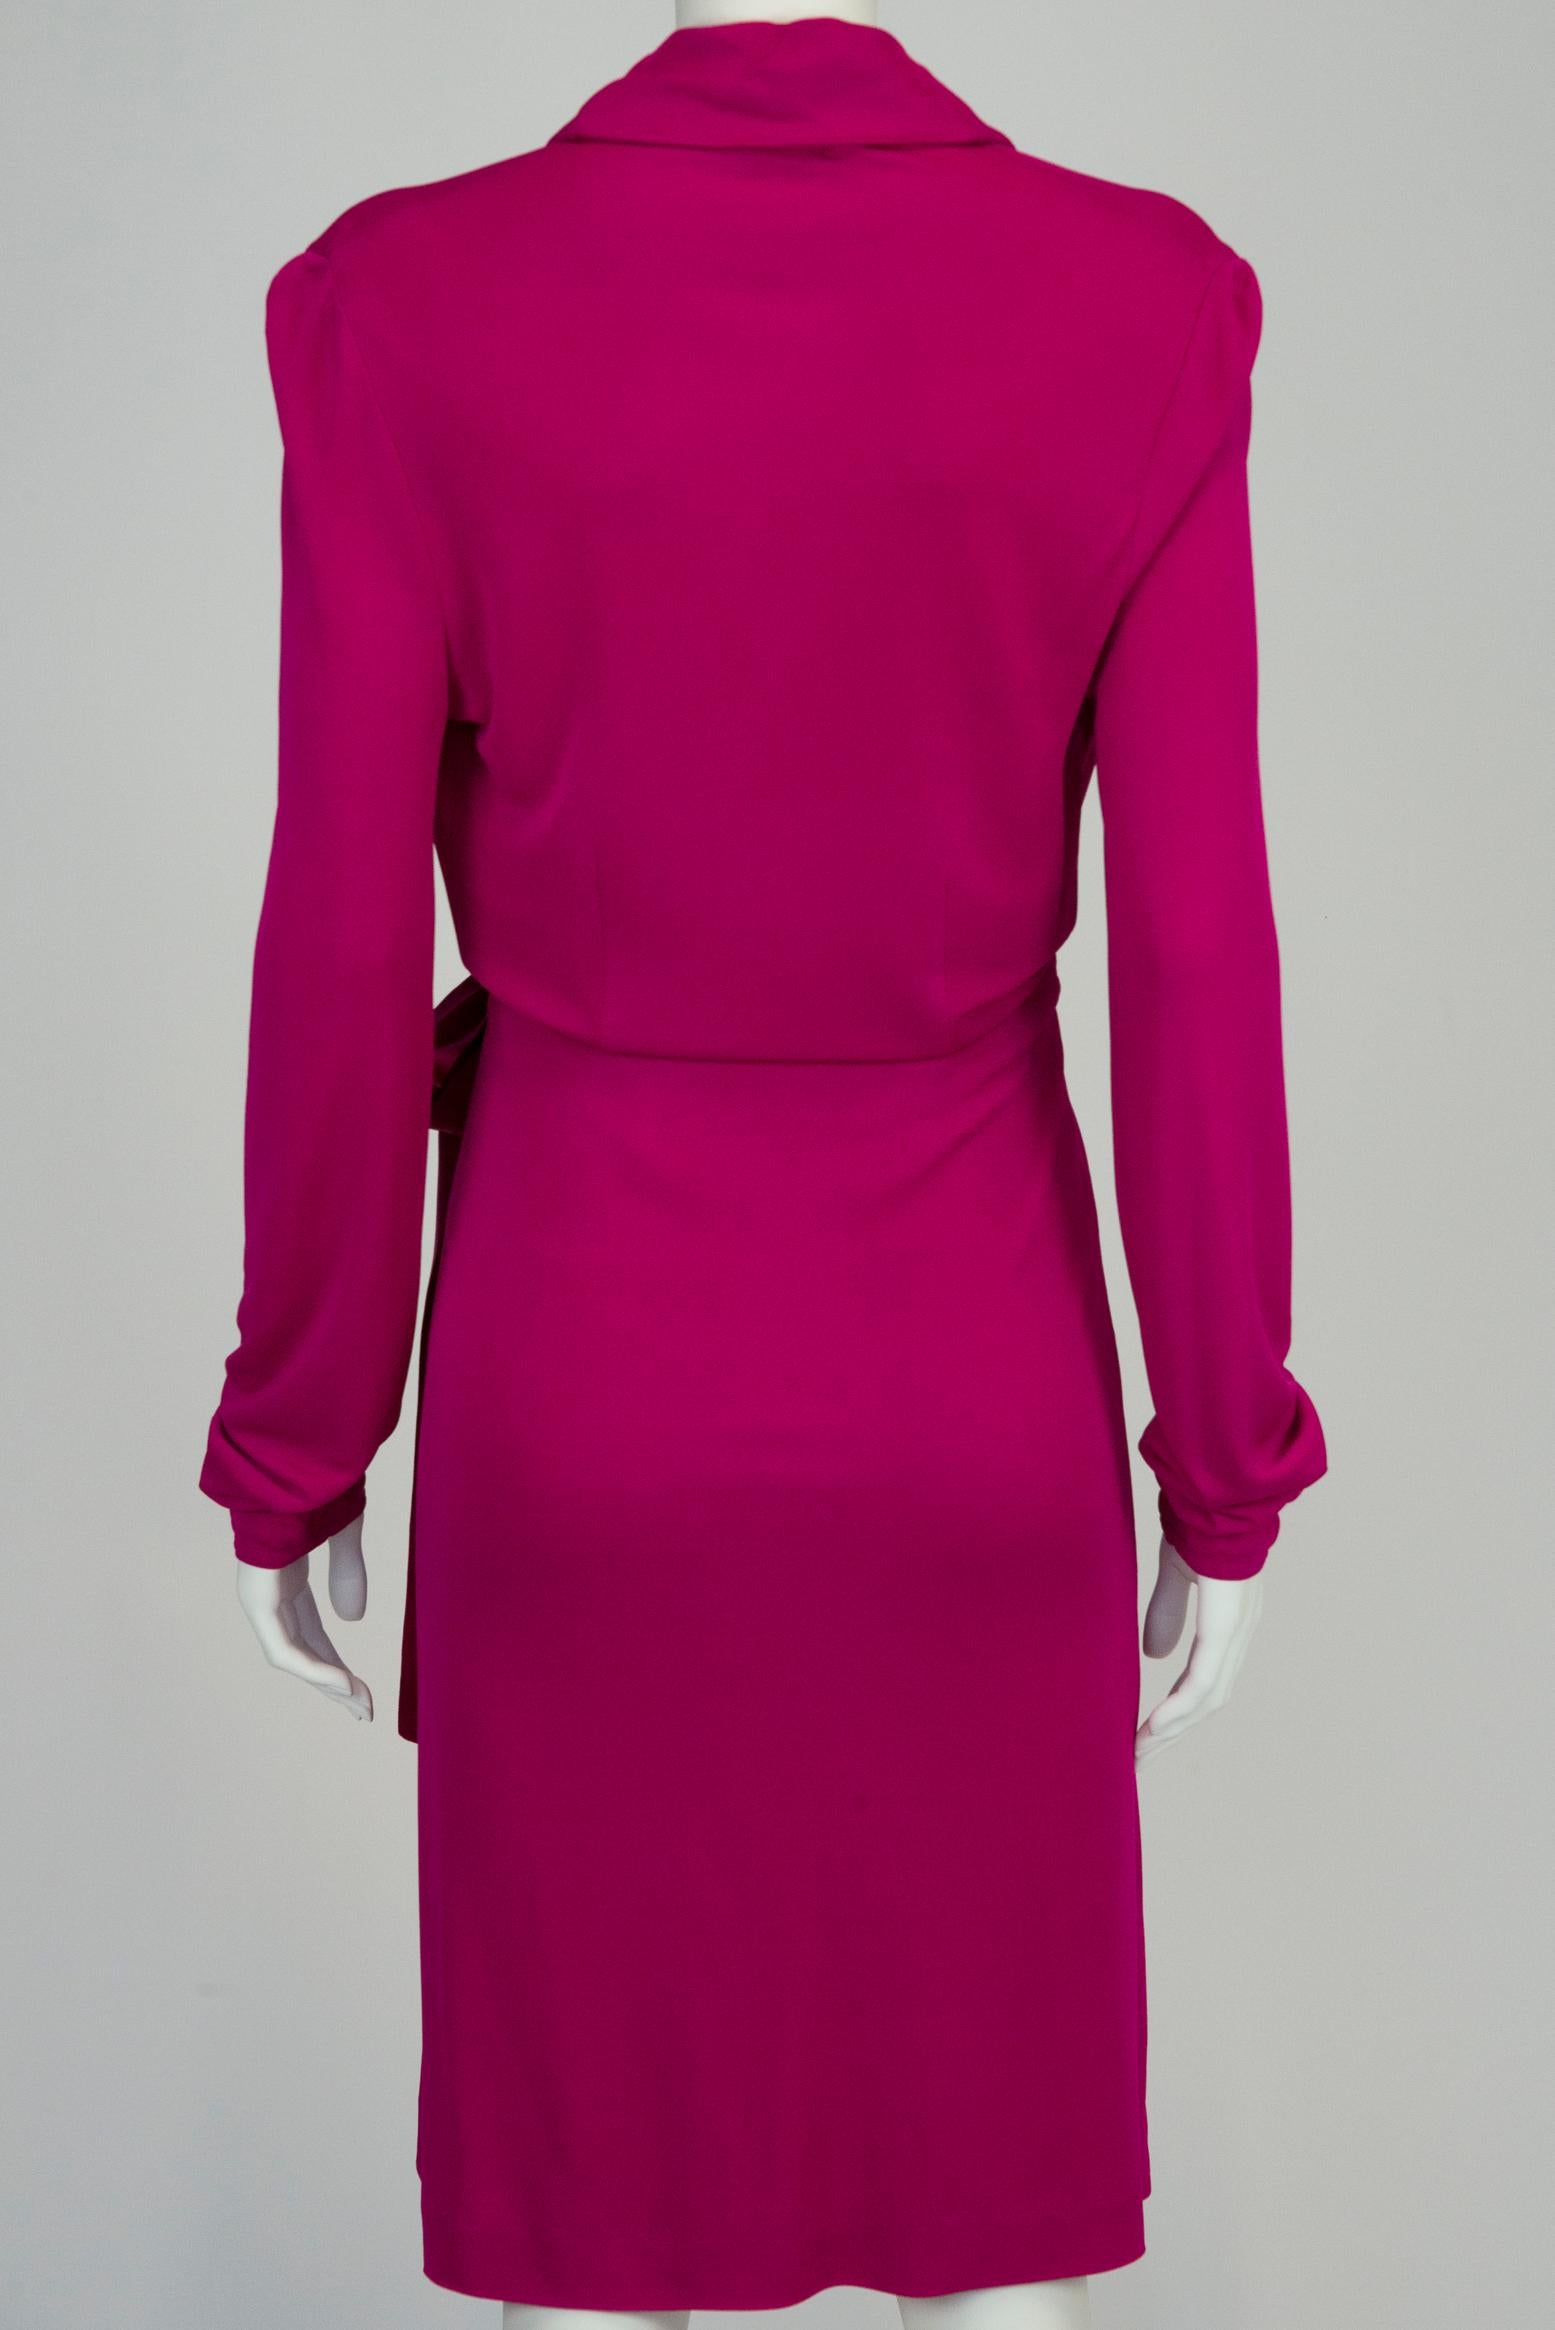 Yves Saint Laurent By Tom Ford Wrap Dress For Sale 5